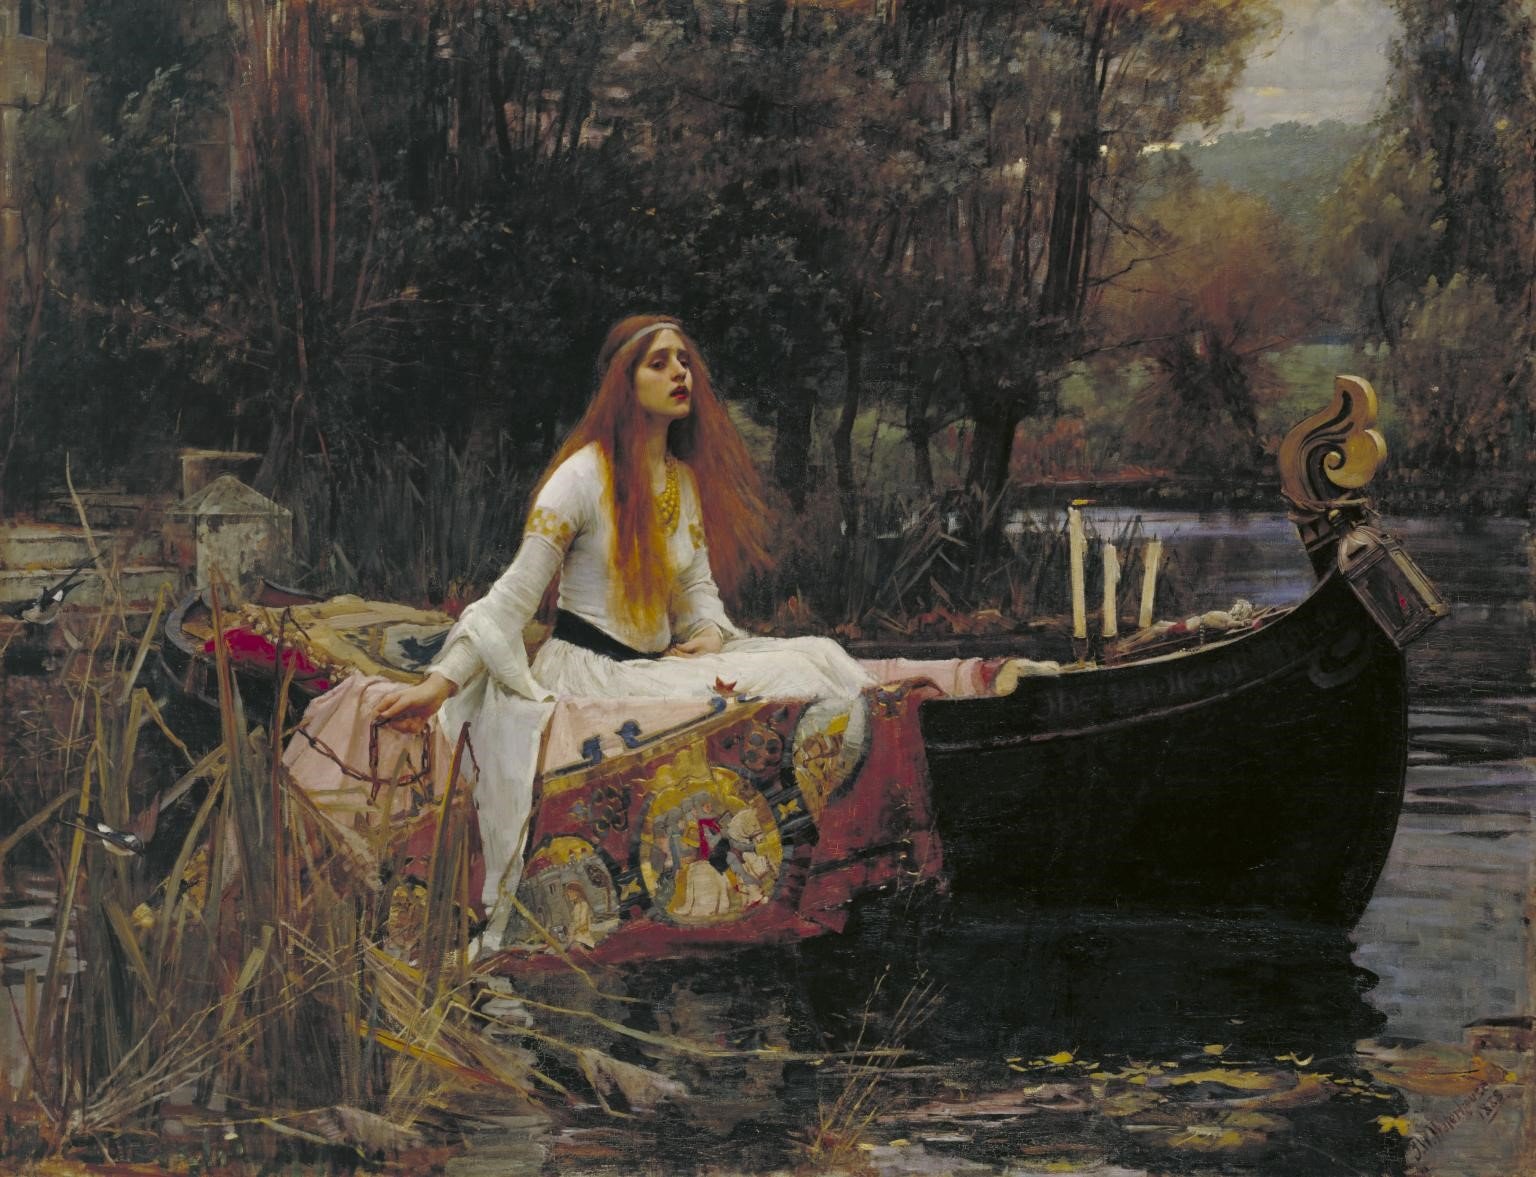 Elaine of Astolat sits in a boat prior to her death by drowning, distraught at being abandoned by Lancelot. Rich medieval tapestries adorn the boat; she wears a white dress with flowing sleeves and has long red hair. 